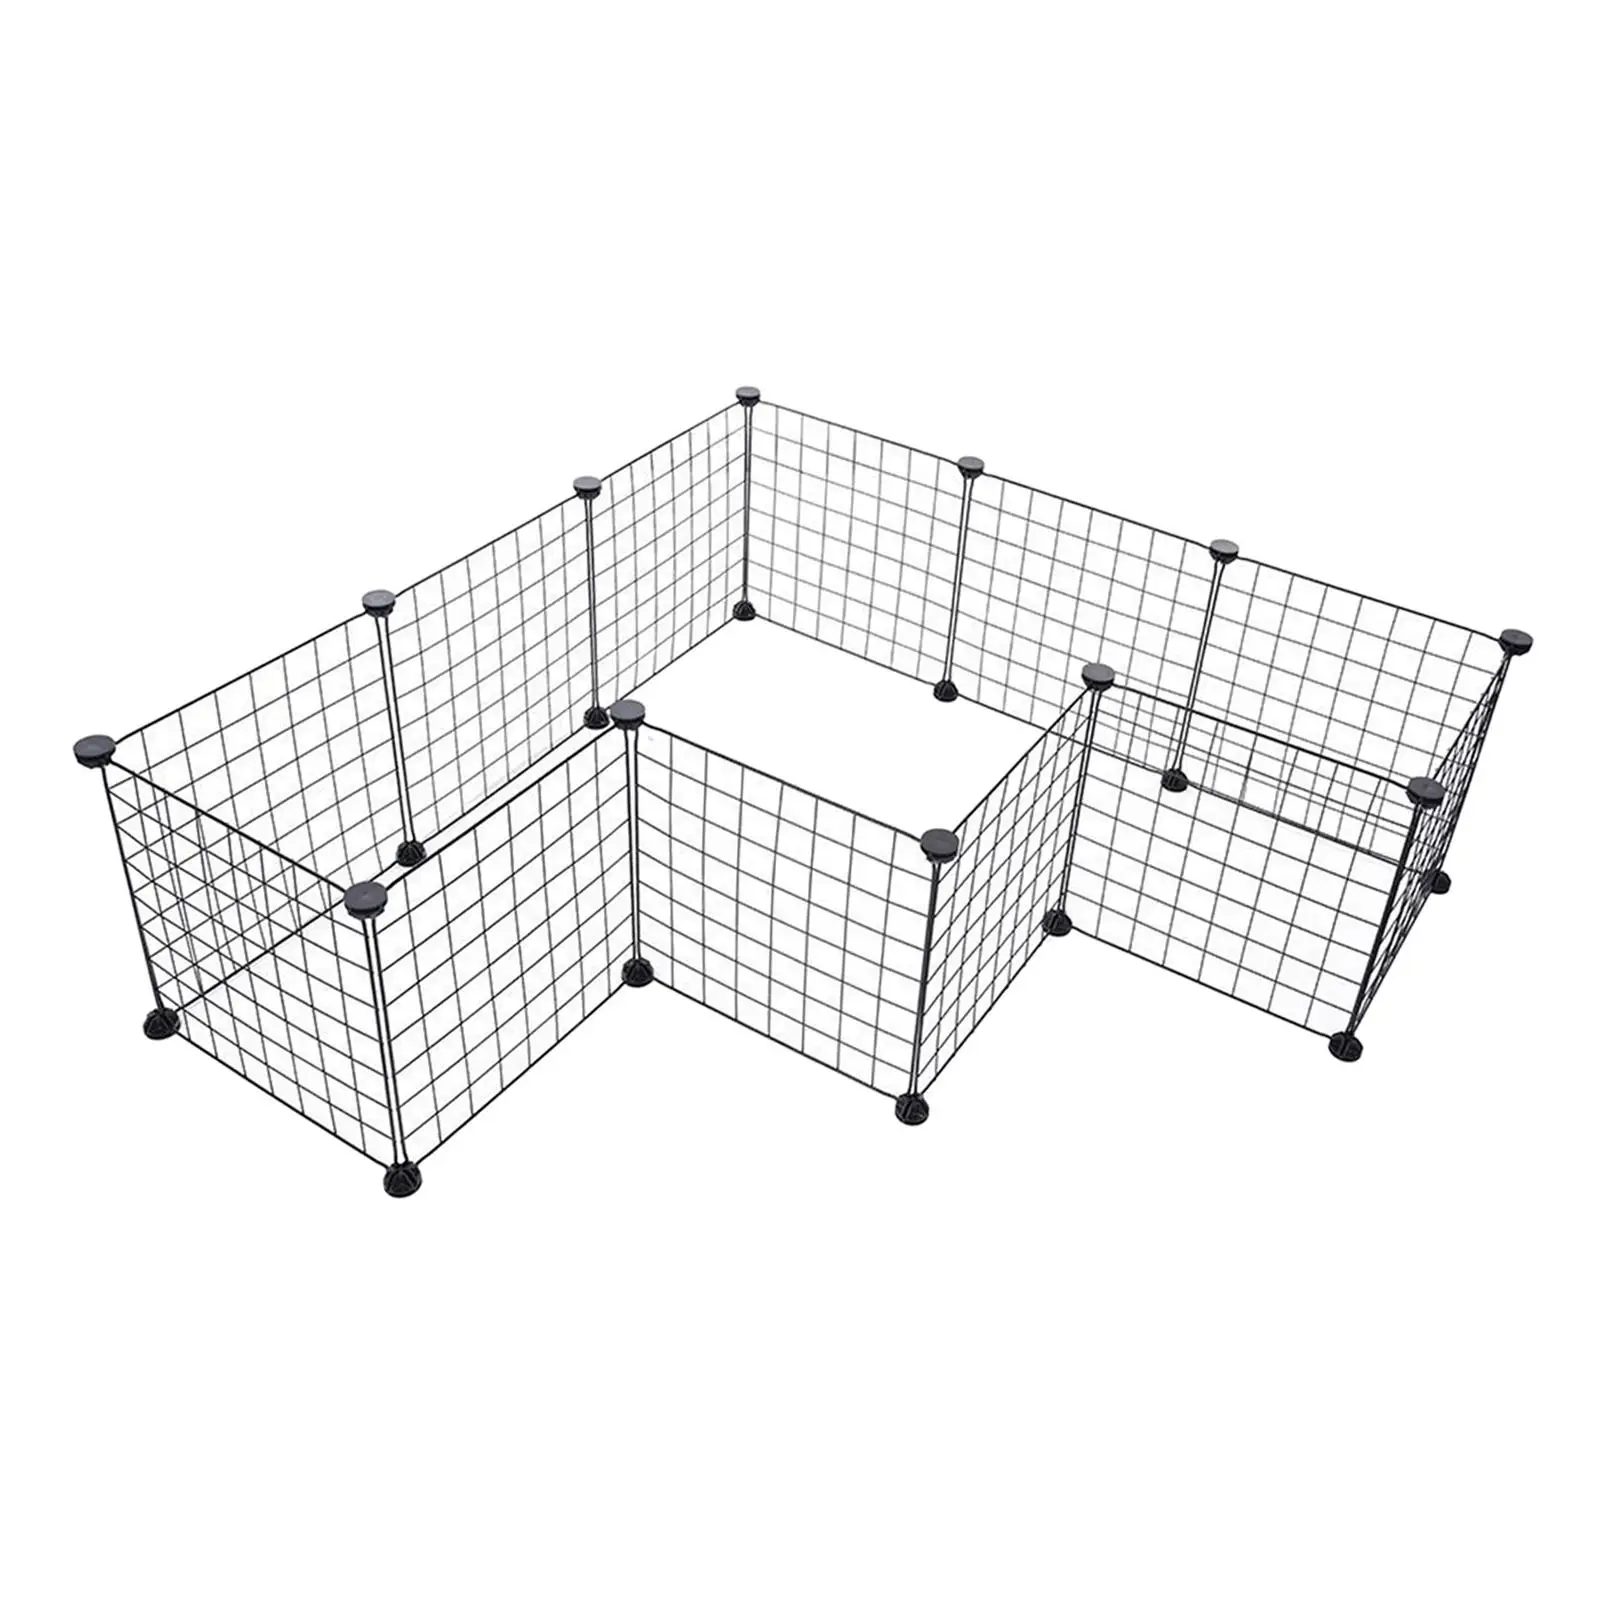 Dog Playpen Portable Dog Exercise Pen Indoor Outdoor Small Animal Cage DIY 12 Panels Pet Fence for Hamster Hedgehog